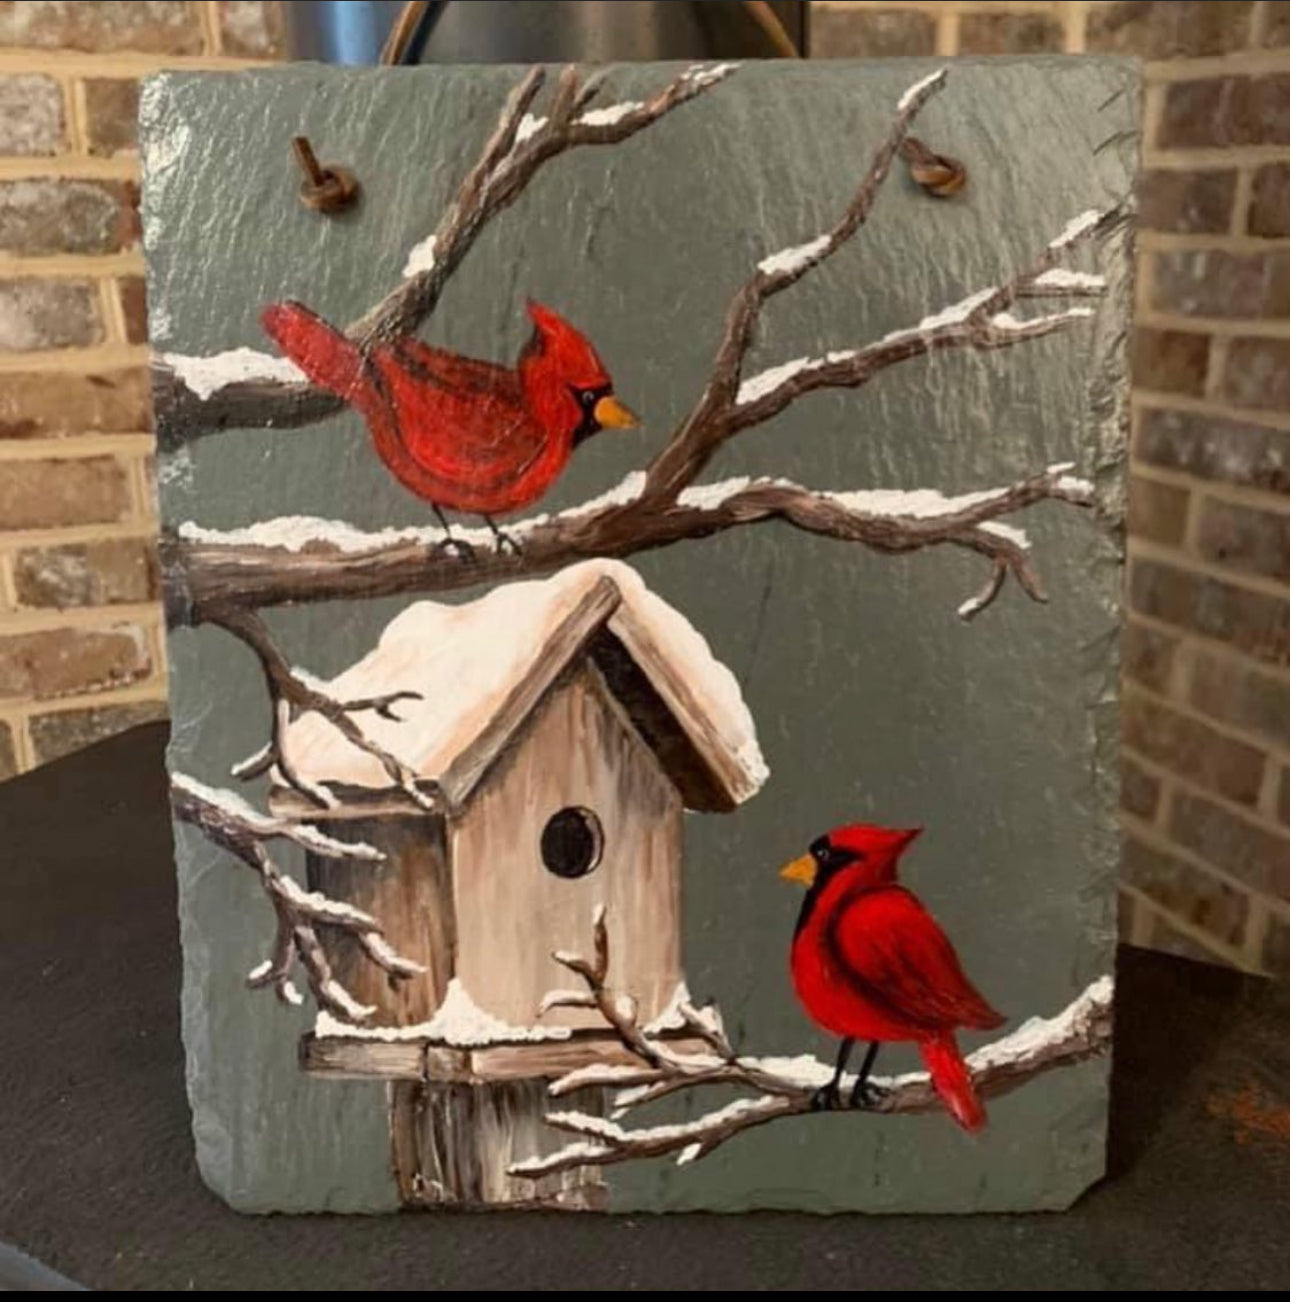 Coming Soon In March! “Cardinal Slate” Paint Night